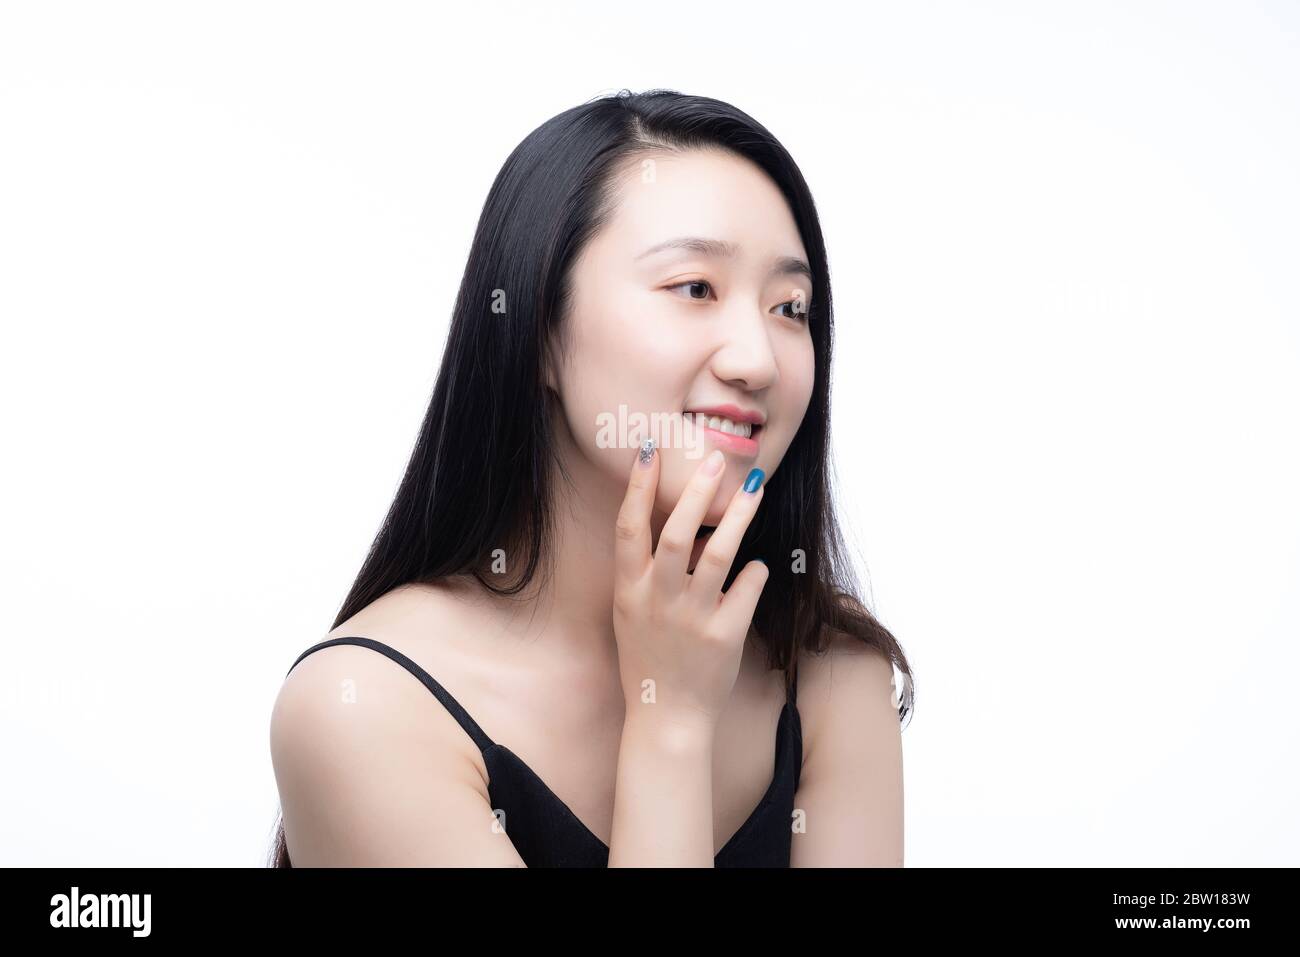 A young Asian woman beauty Stock Photo